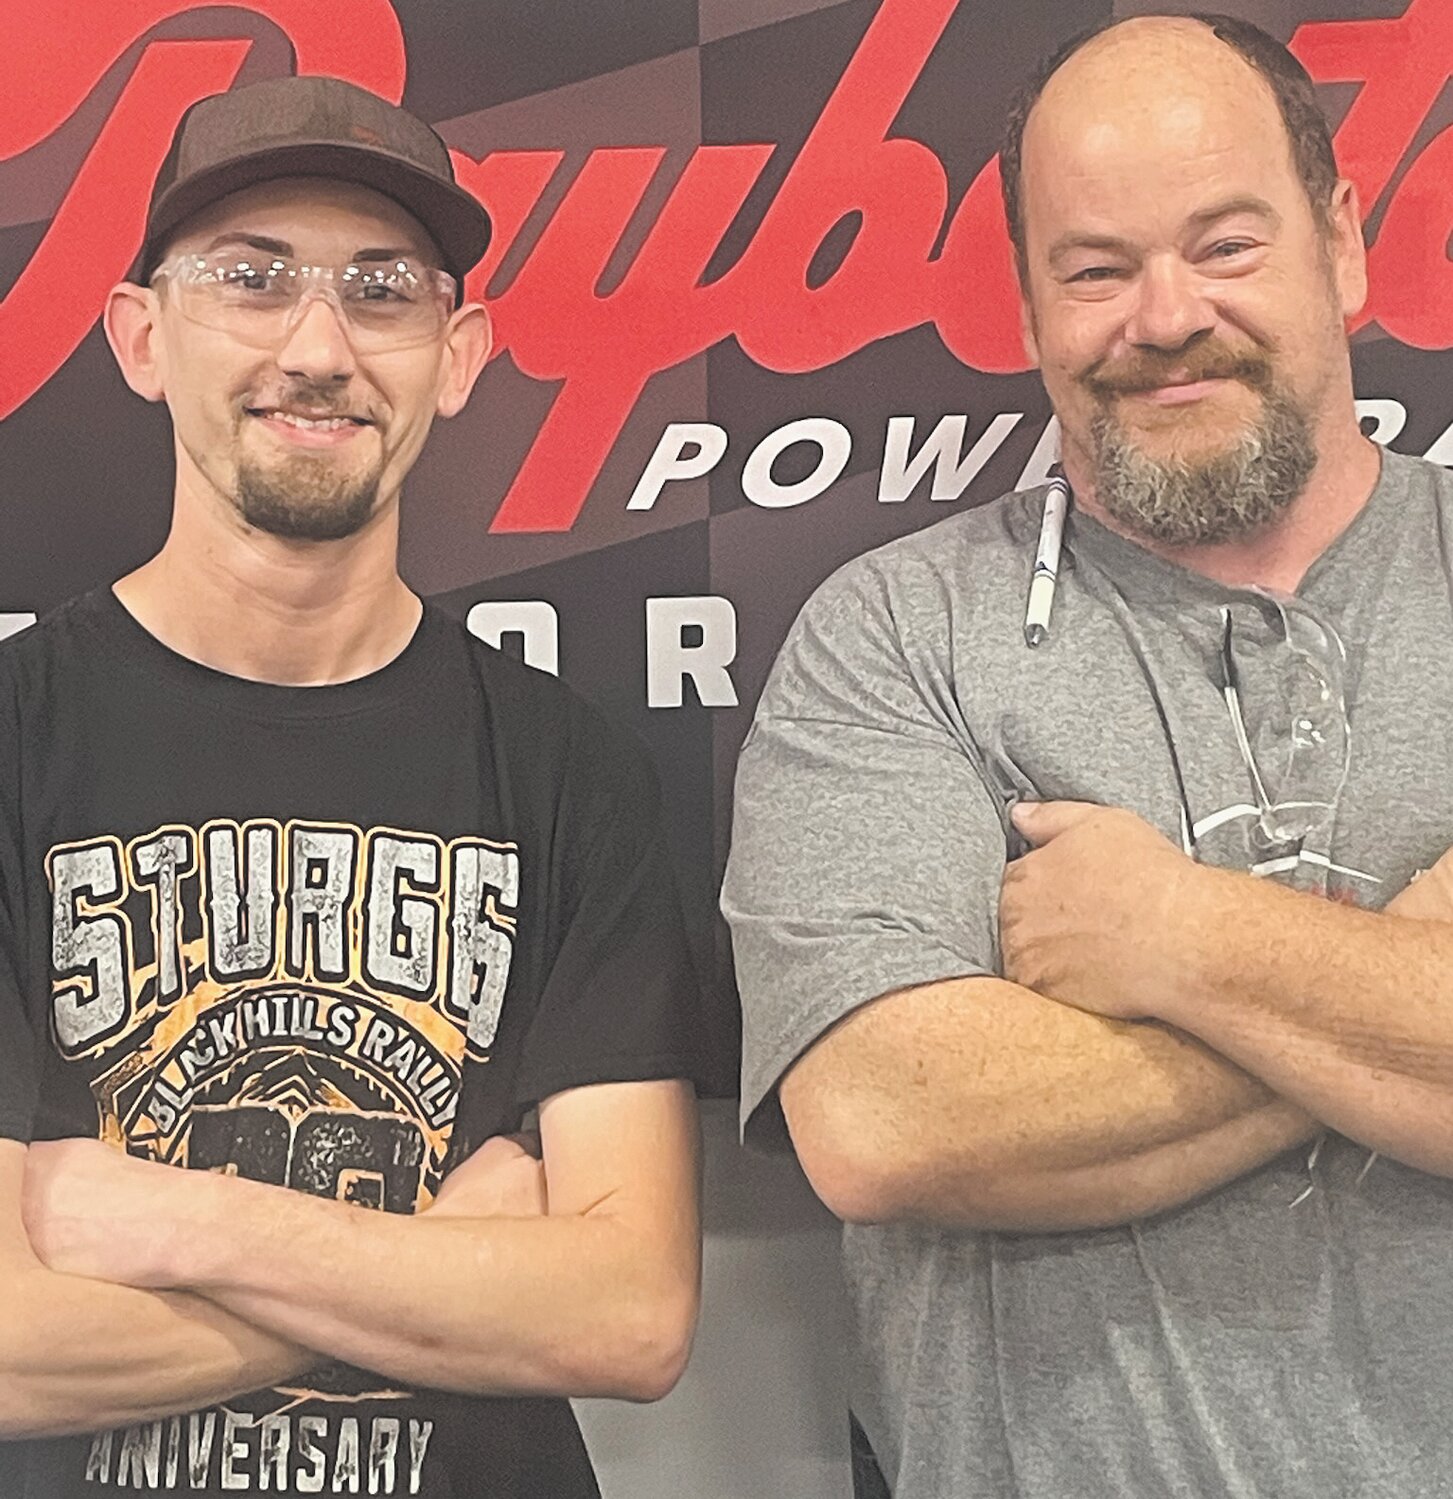 Lance Norman, left, celebrated five years at Raybestos Powertrain. He is pictured with Chris Conkright.